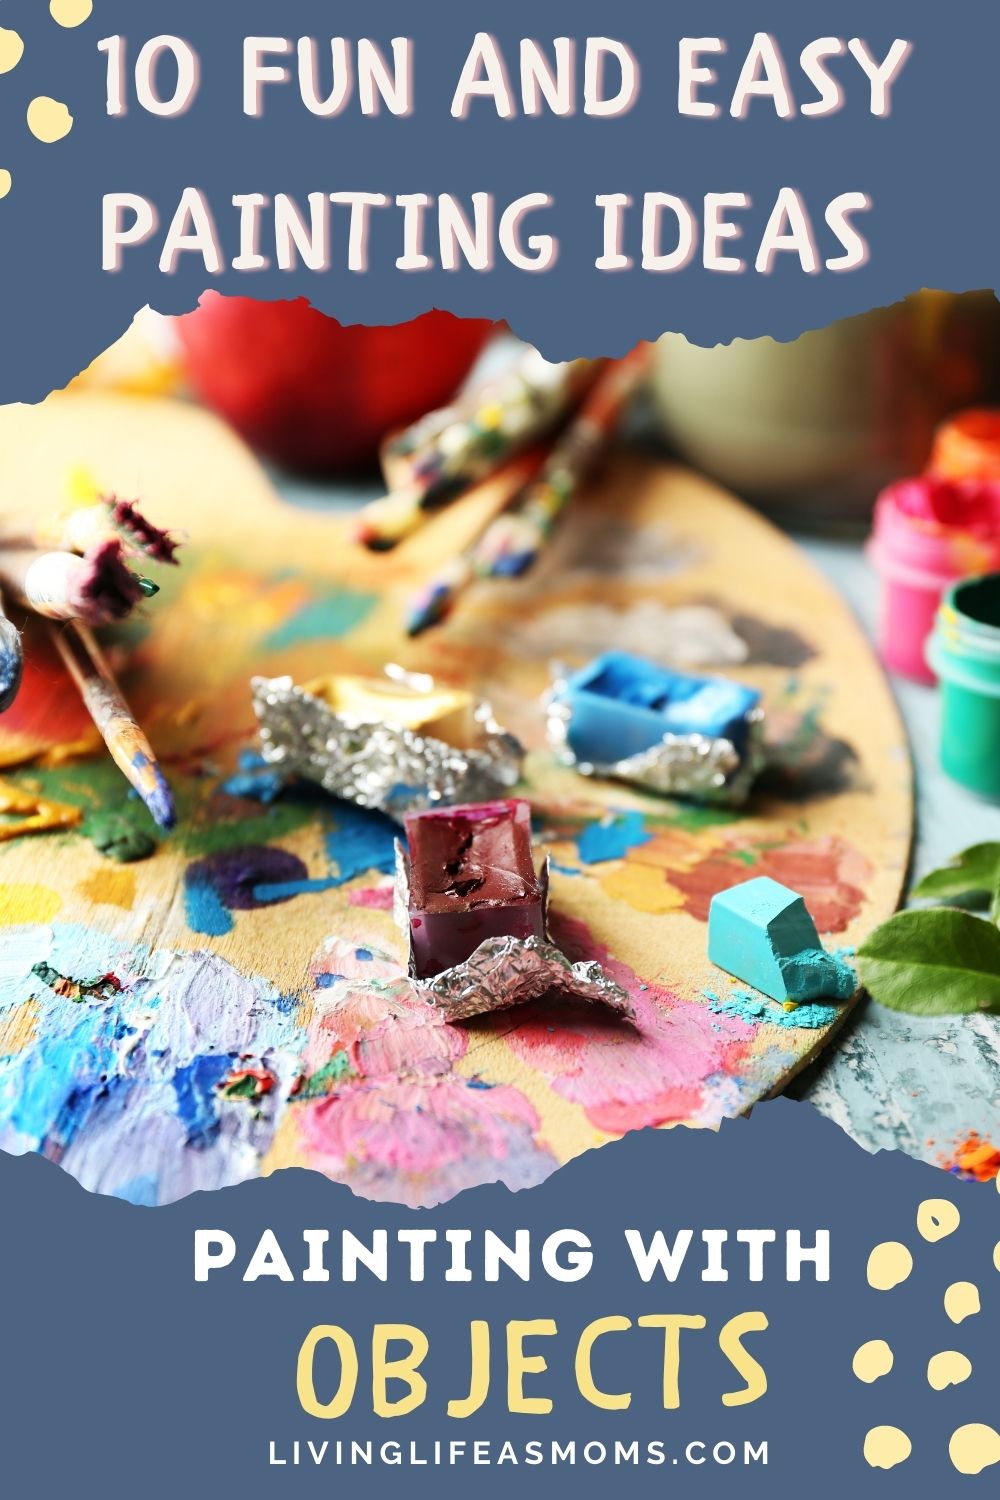 painting ideas that are easy include using random objects to create defined or abstract images